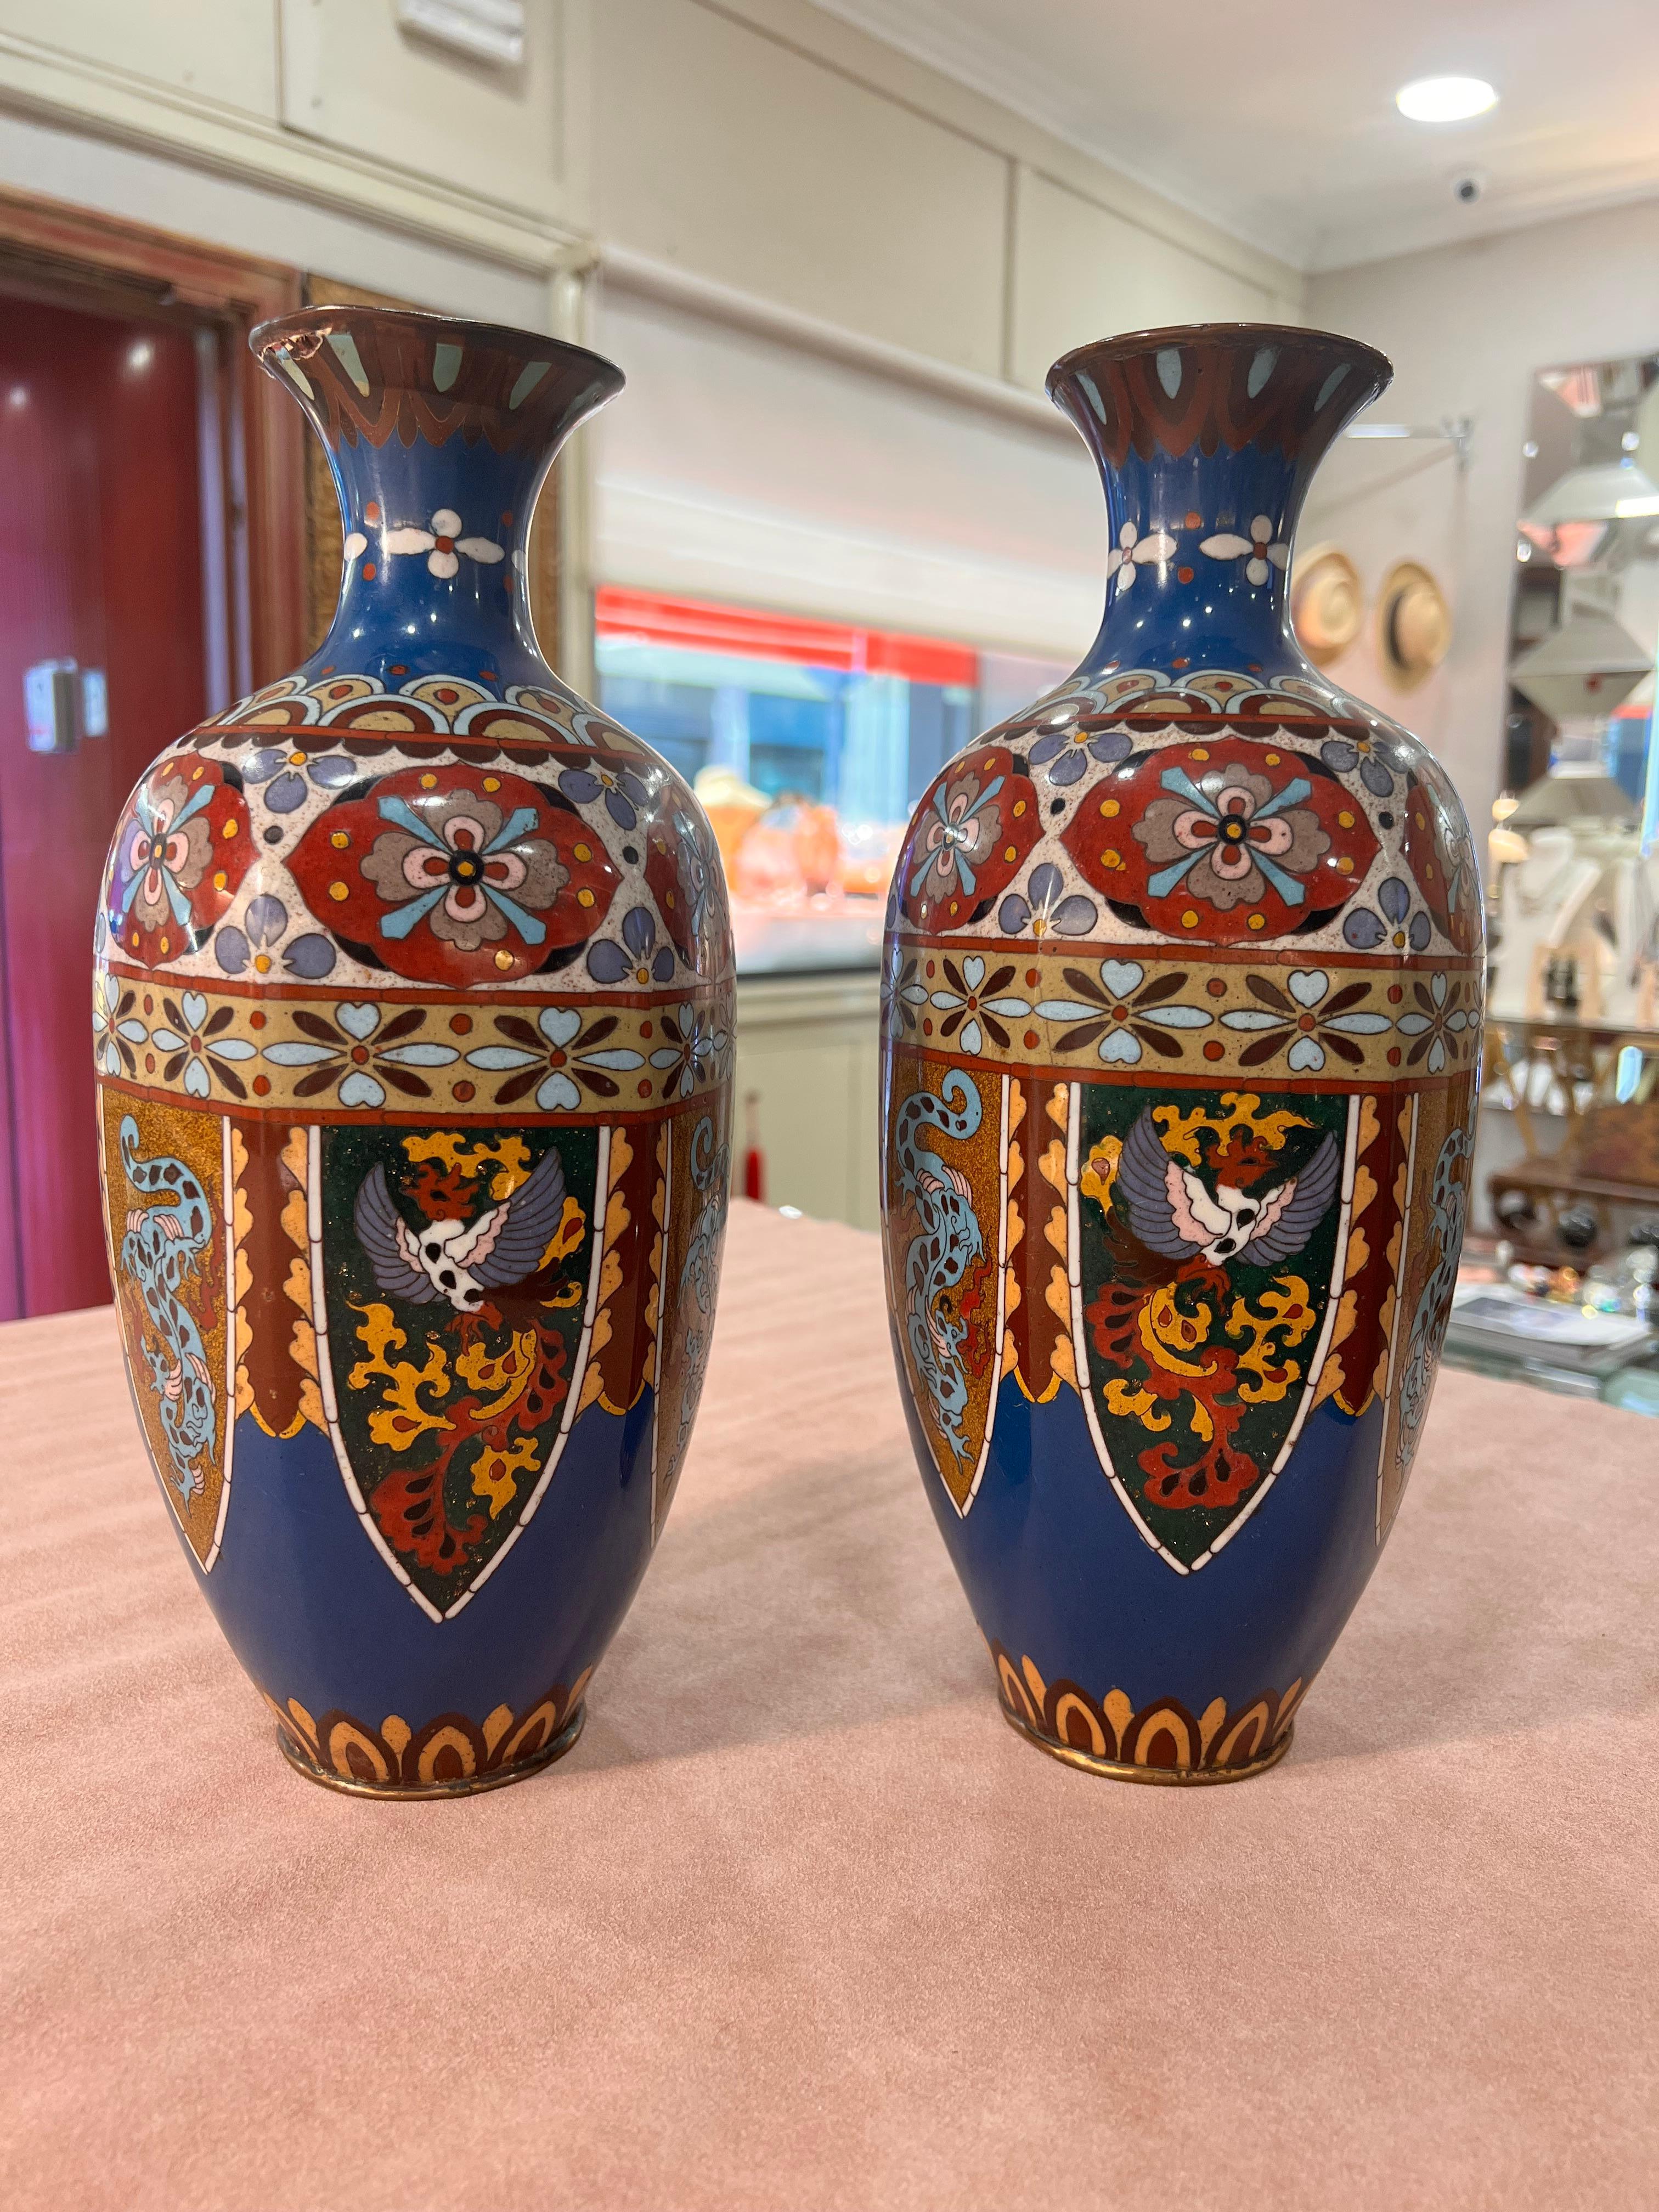 Chinese Ceramic vases early XX century 
Beautiful pieces for central decor of living room or main reception area.
Beautiful blue and ocre colors with dragons and mytholgical birds.
Sizes 33 x 13 cm / 12.99 x 5.11 inches. 
Signes AS 1/2

PRADERA is a